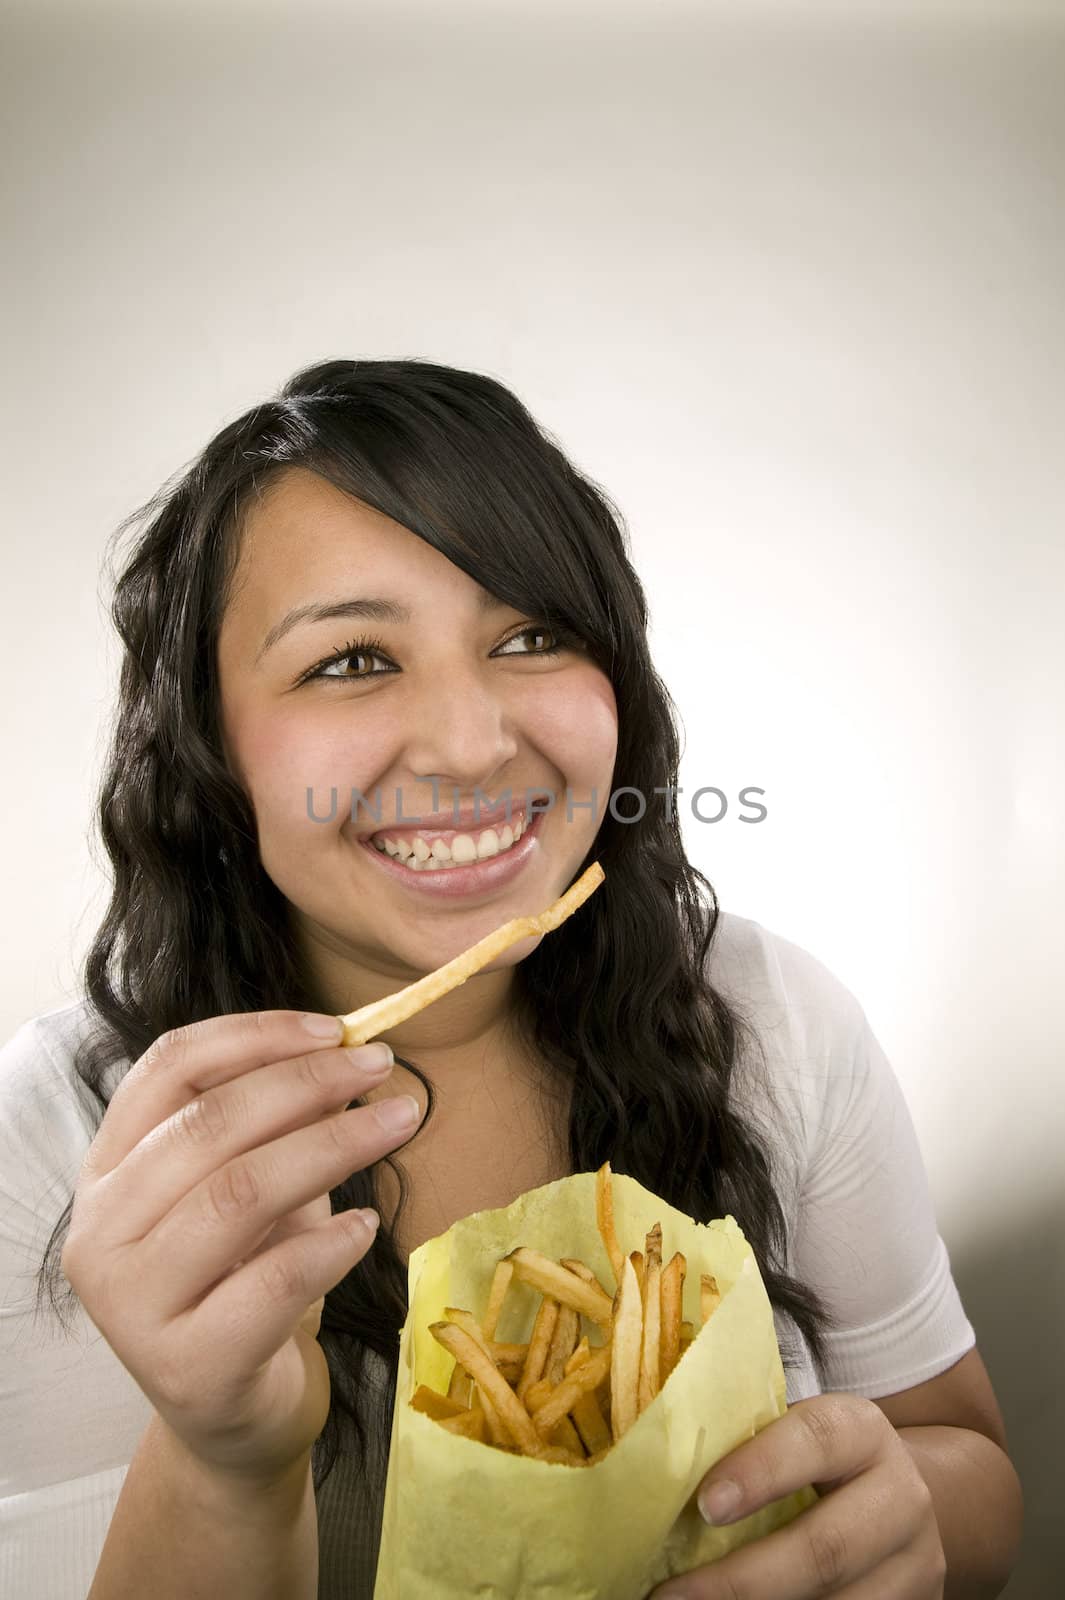 Portrait of a teenage Latina with fries.